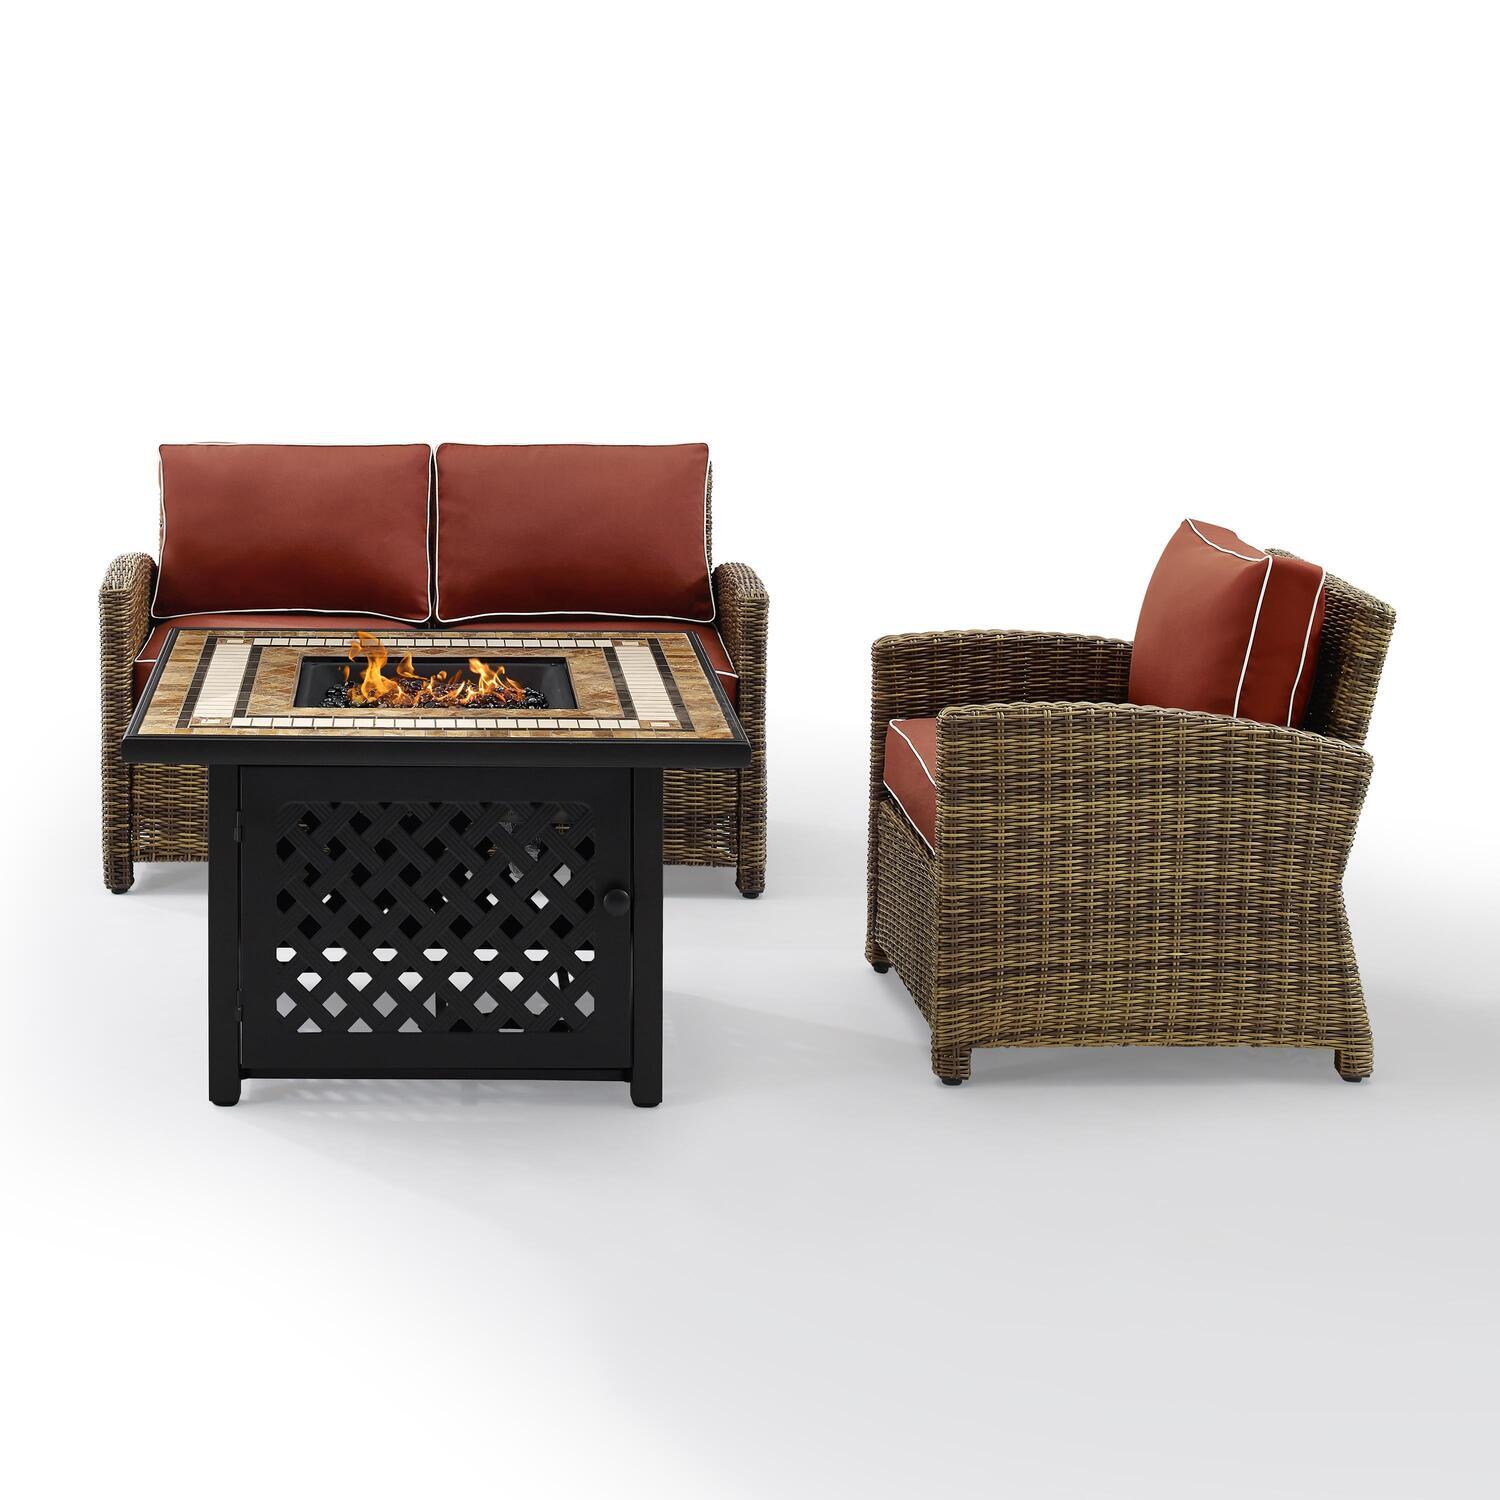 Crosley Furniture Bradenton 3Pc Patio Fabric Fire Pit Sofa Set in Brown/Red - image 1 of 9